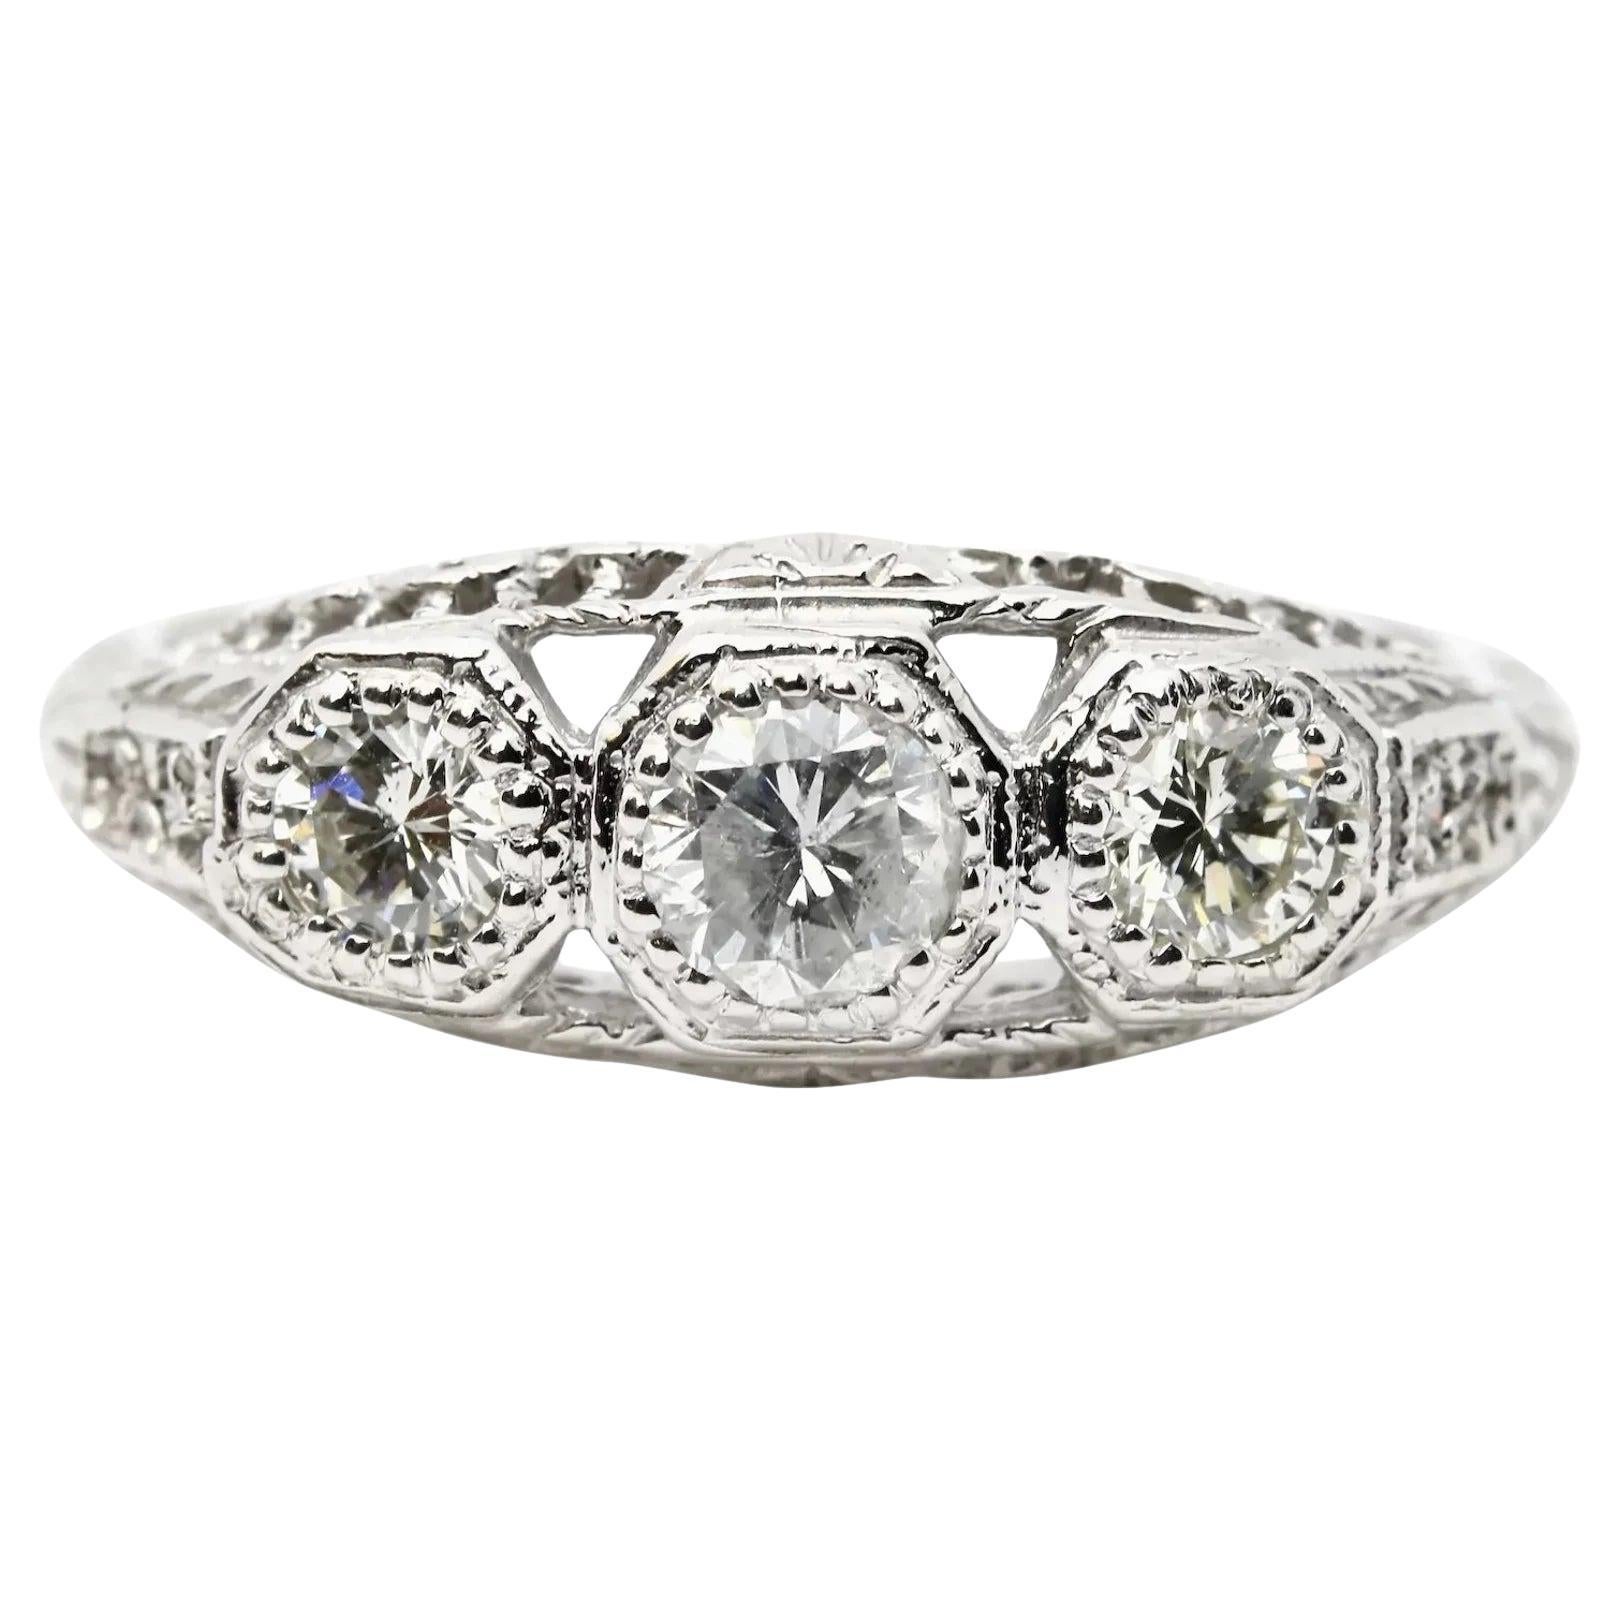 Floral Art Deco 0.80ctw Three Stone Diamond Ring in 18K White Gold For Sale